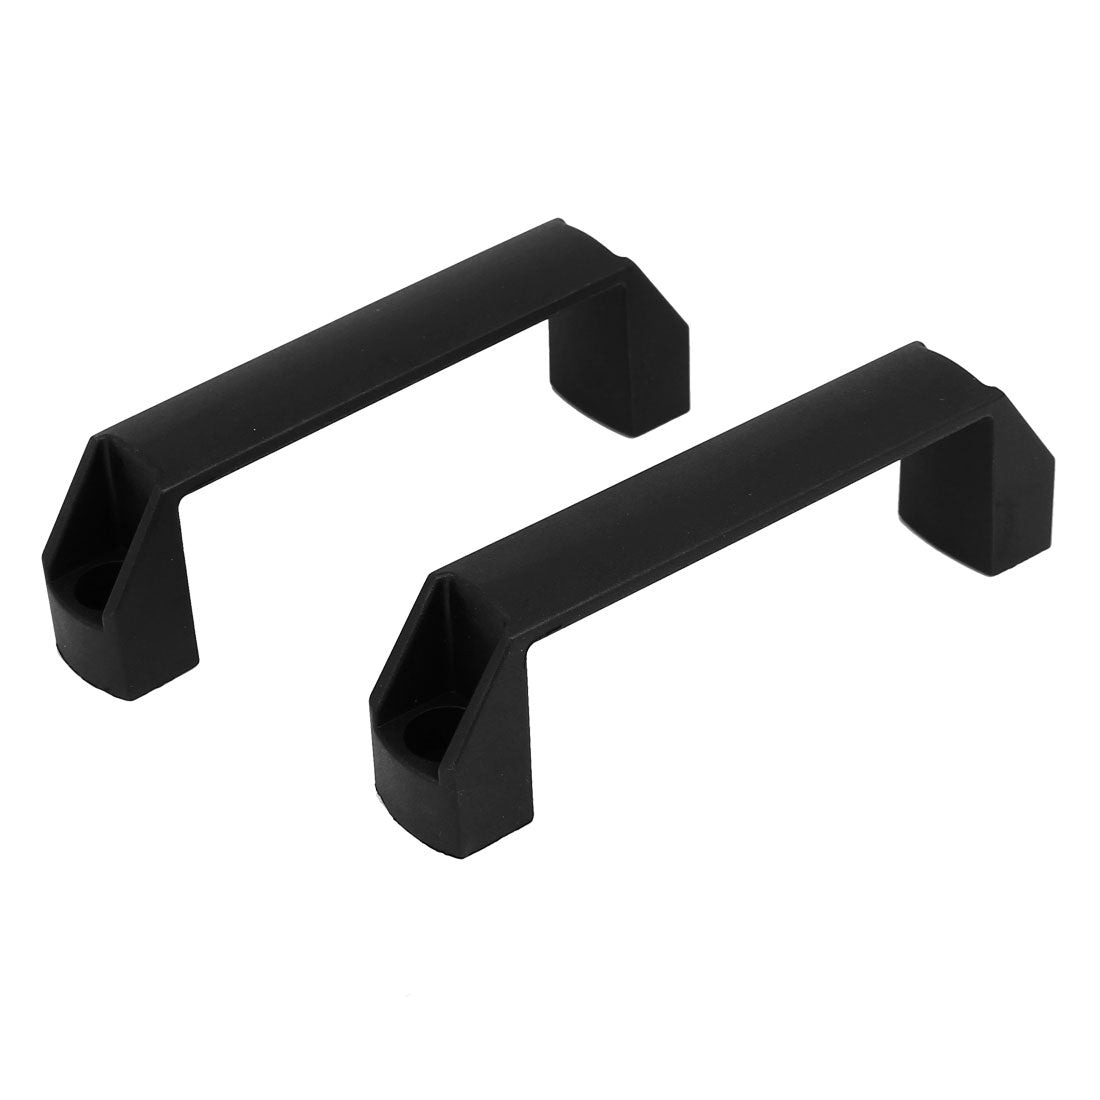 uxcell Uxcell Cupboard Cabinet Gate Door Plastic Pull Handles Black 140mm Length 4pcs